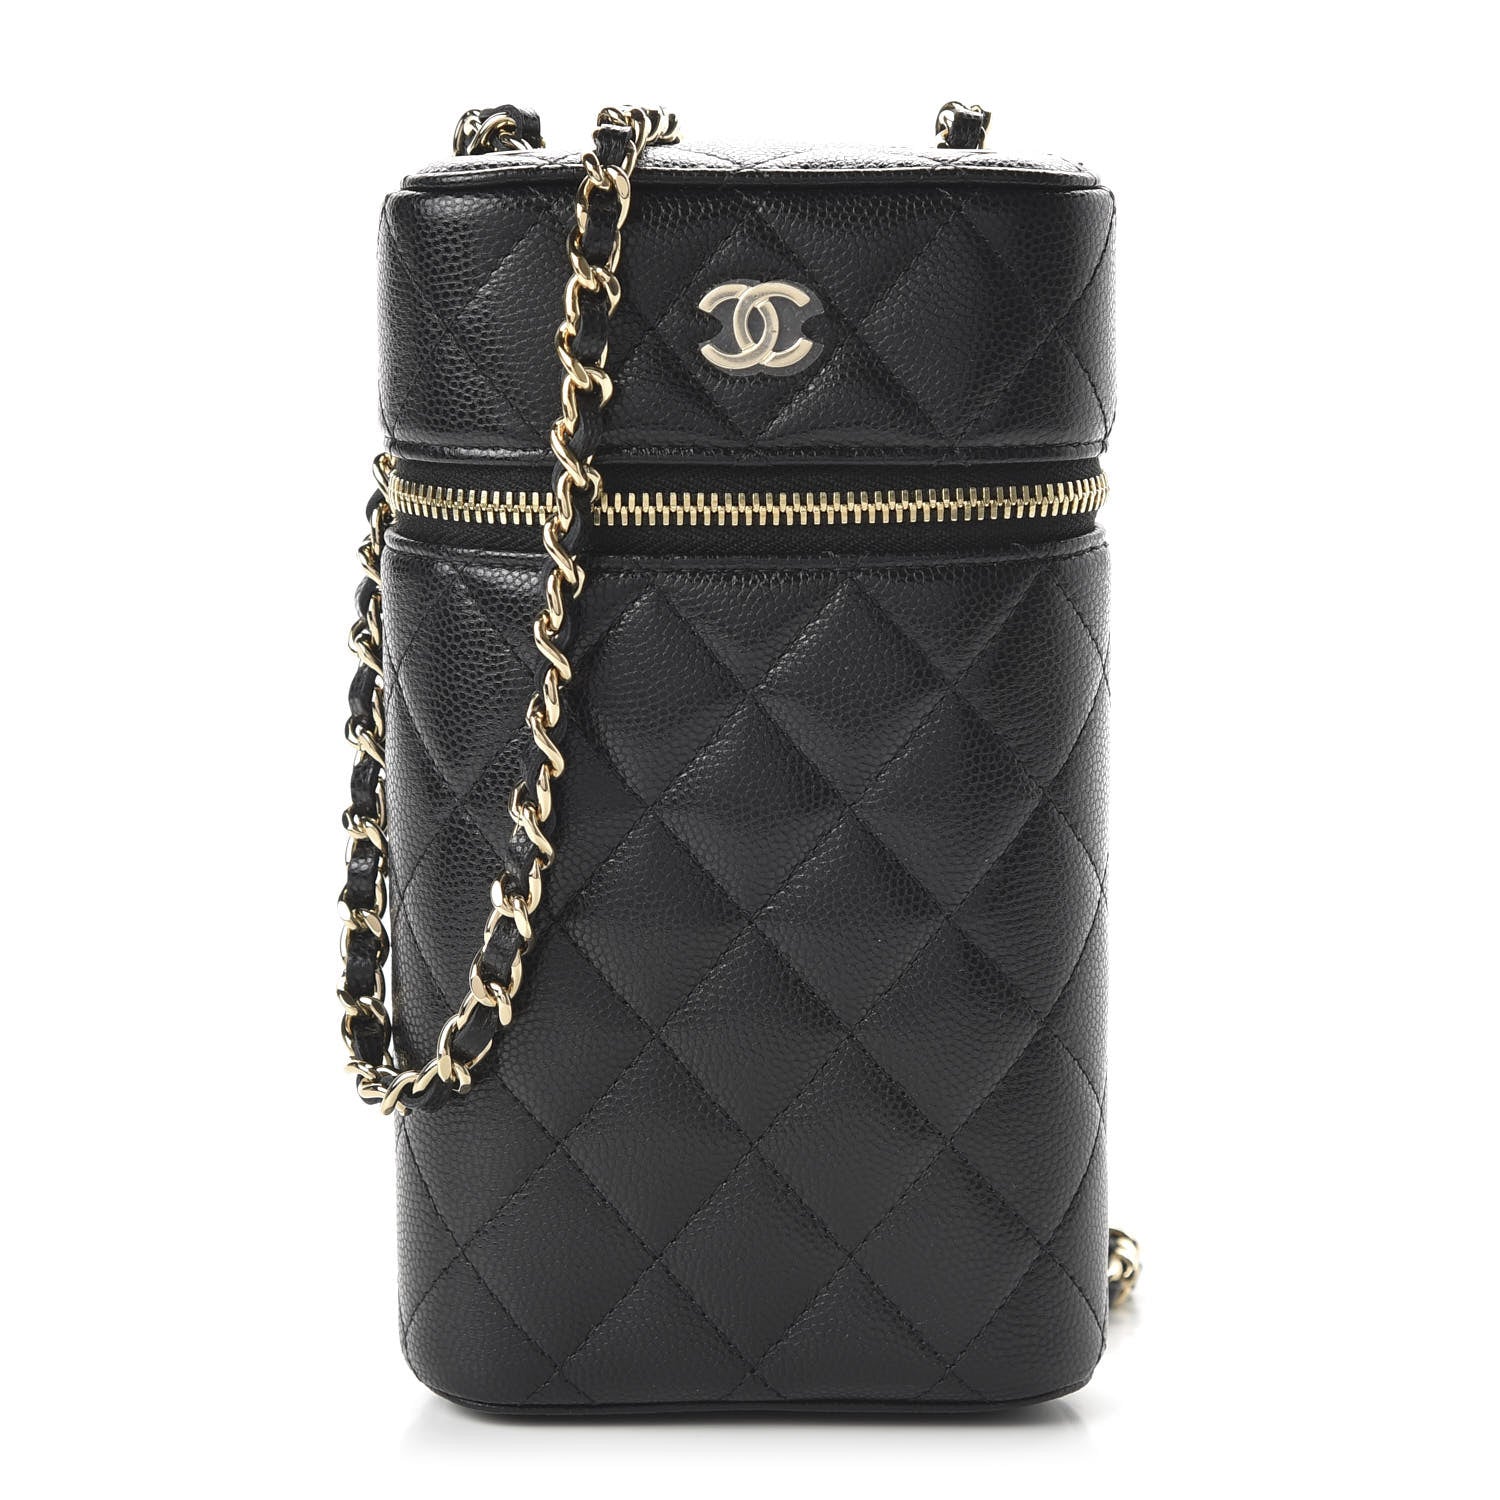 CHANEL CLASSIC CAVIAR QUILTED VANITY PHONE HOLDER WITH CHAIN – The